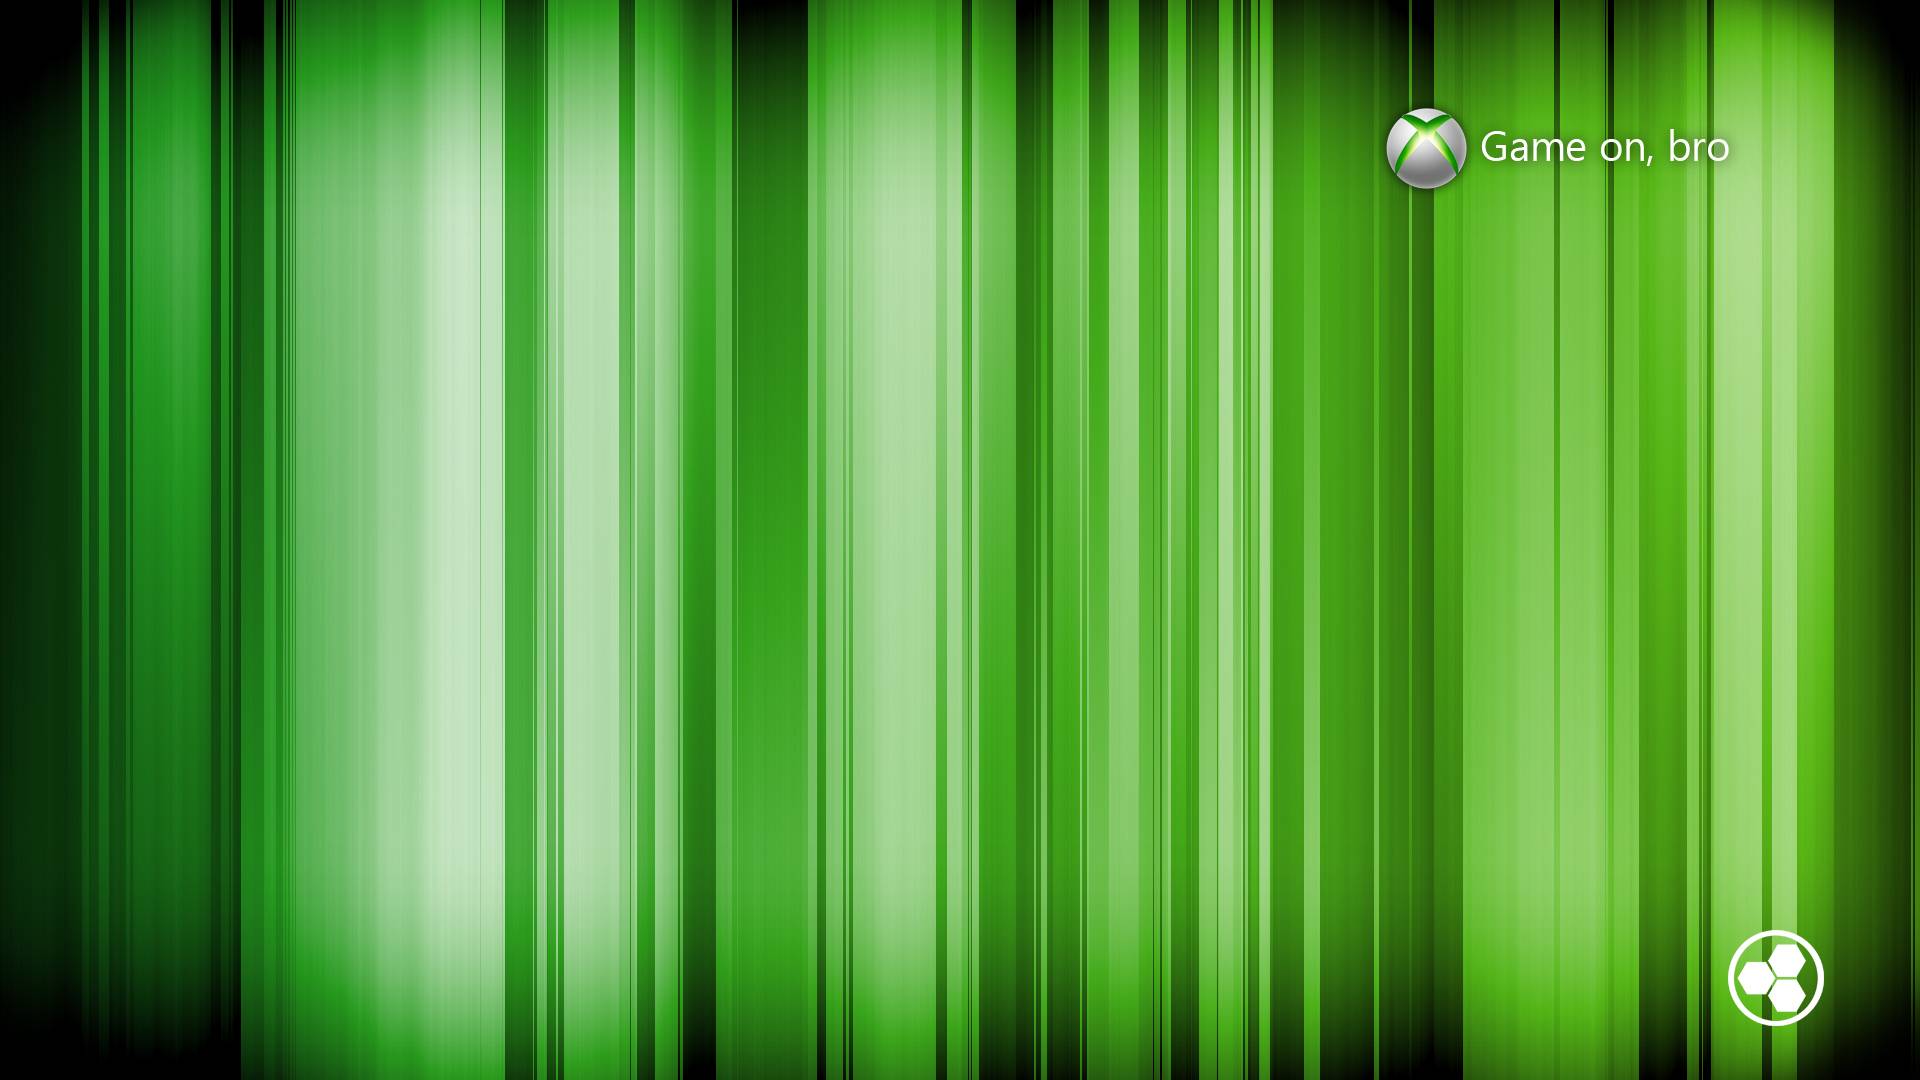 Xbox Simple Game Live Wallpaper